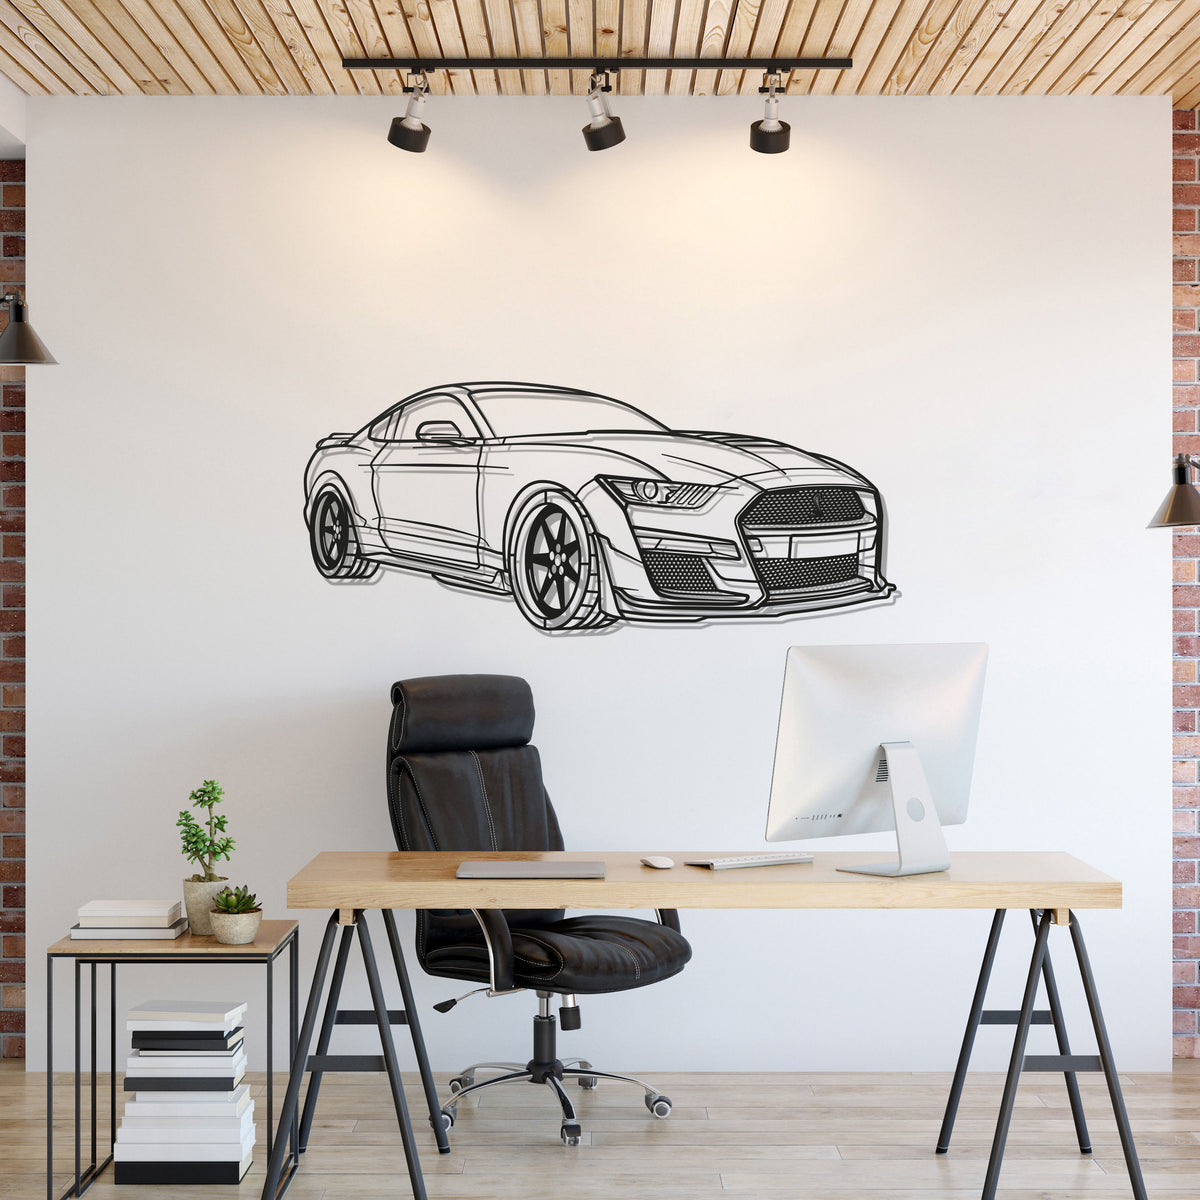 Mustang Shelby GT500 Perspective Metal Car Wall Art - MT0445